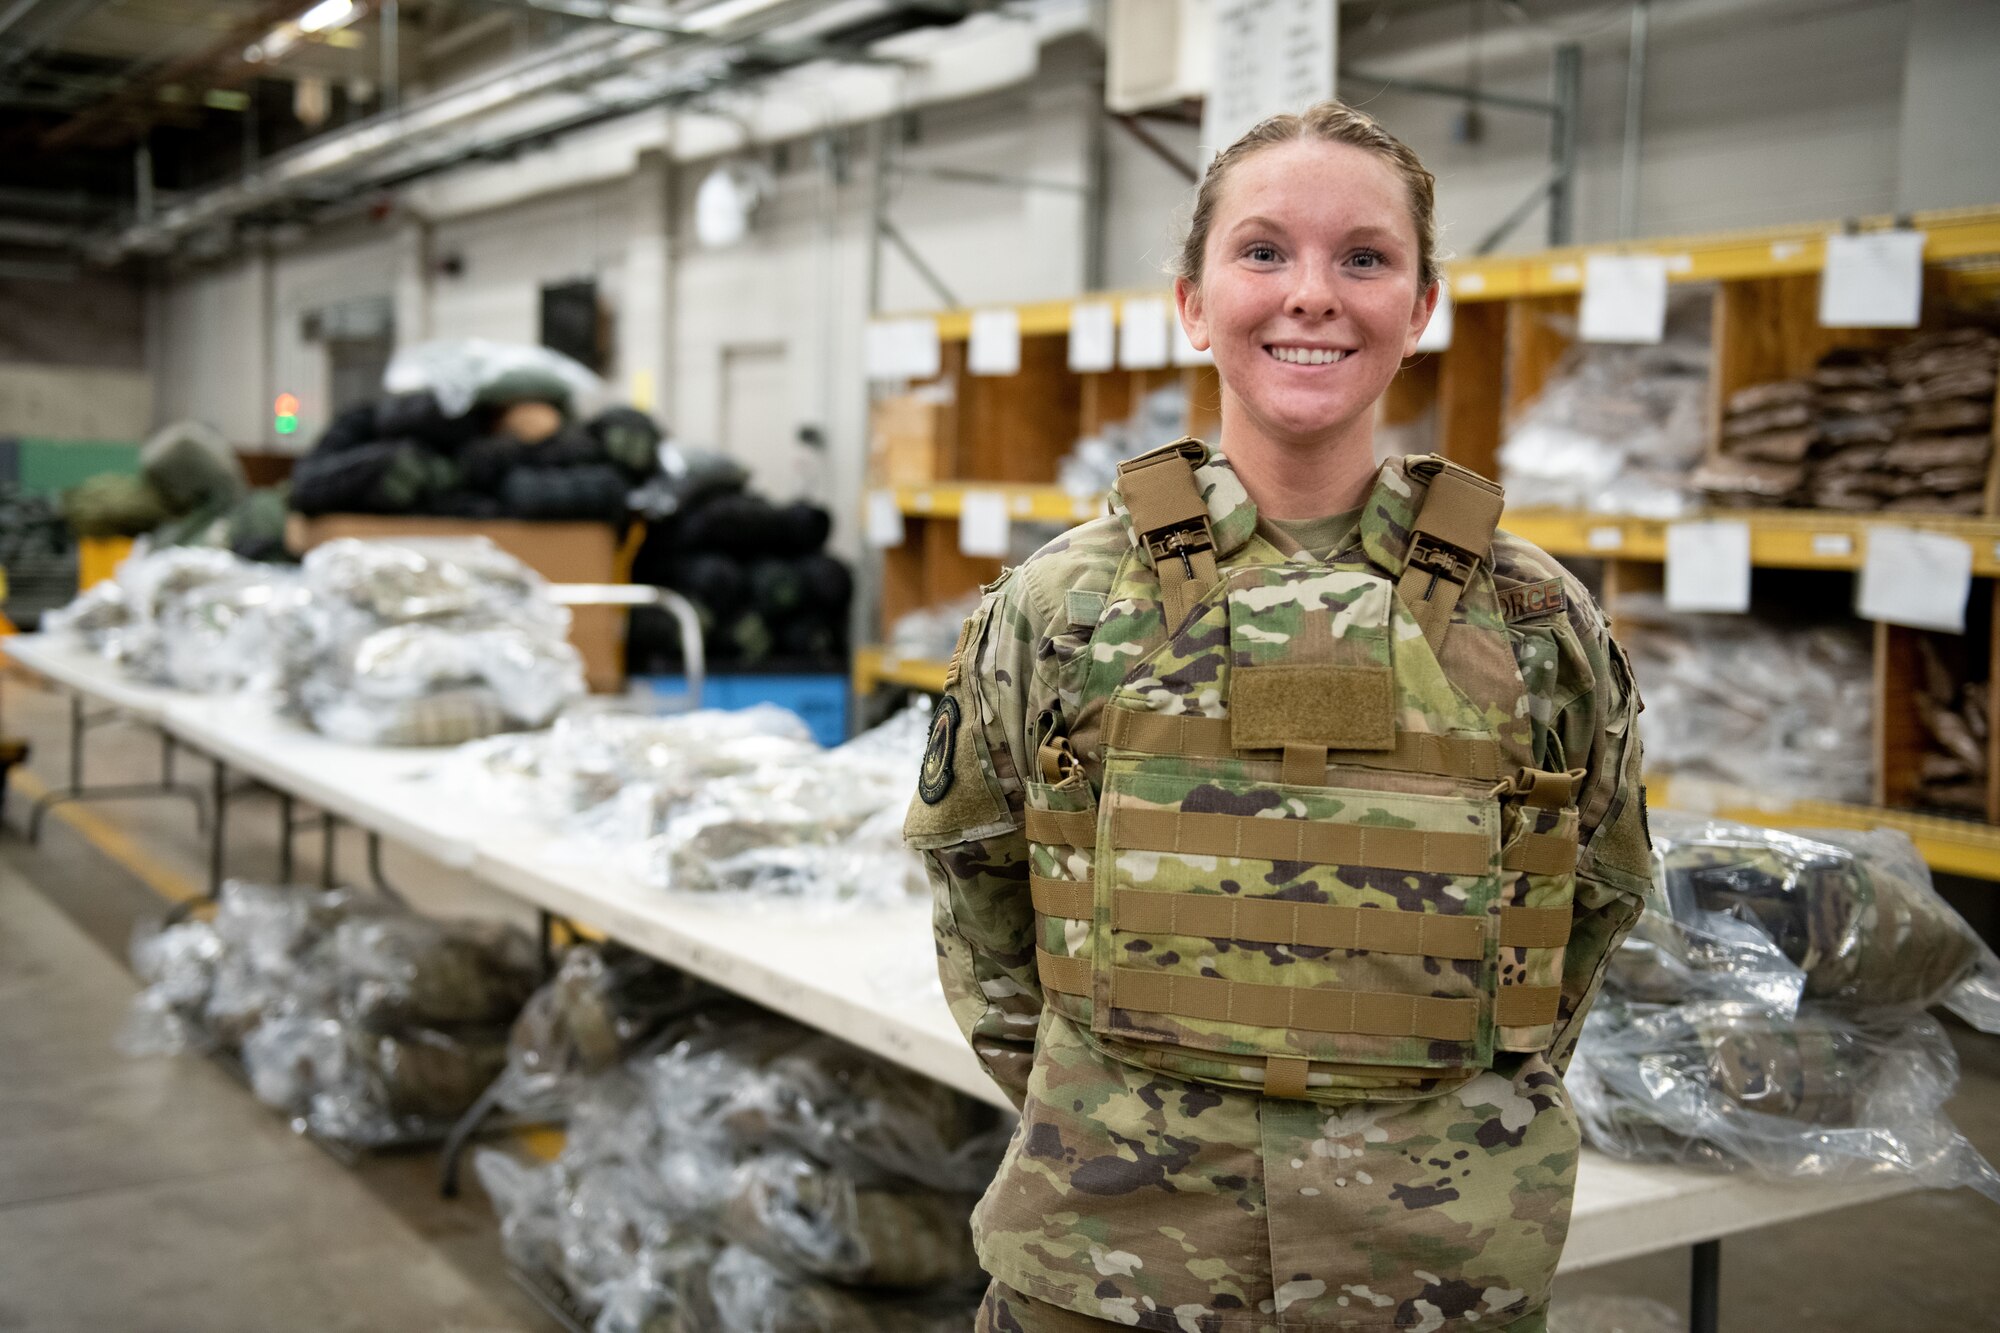 Airman Grace Bailey poses in front of the Aspetto Mach V Female Body Armor (FBA) system at the Individual Protective Equipment center at Ellsworth Air Force Base, S.D., Mar. 2 2021. The new FBA is lighter, more comfortable and is designed specifically to fit female AIrmen